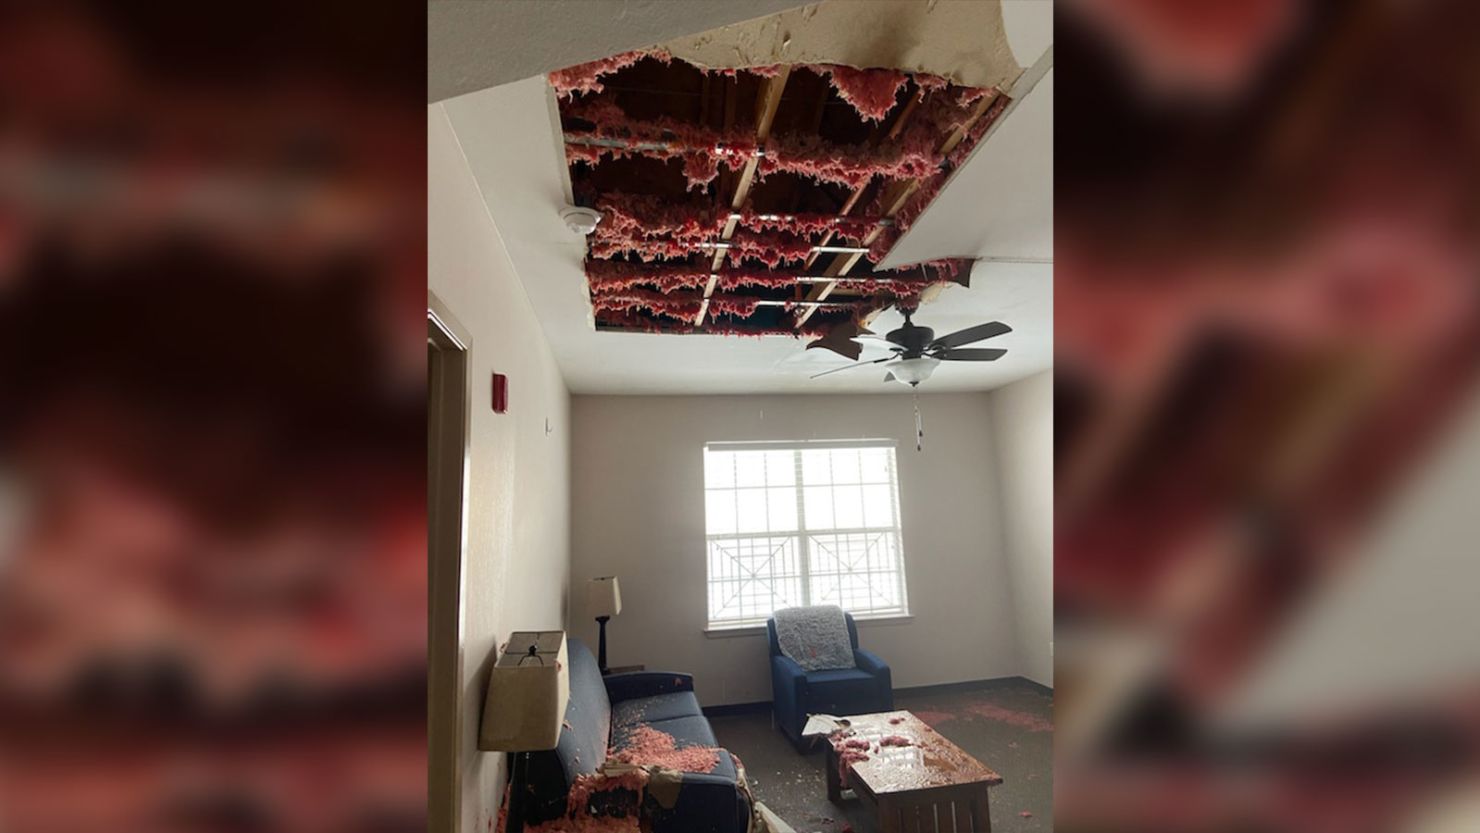 The roof of Genesis Women's Shelter & Support's transitional housing was badly damaged in the Texas storms, causing damage inside.